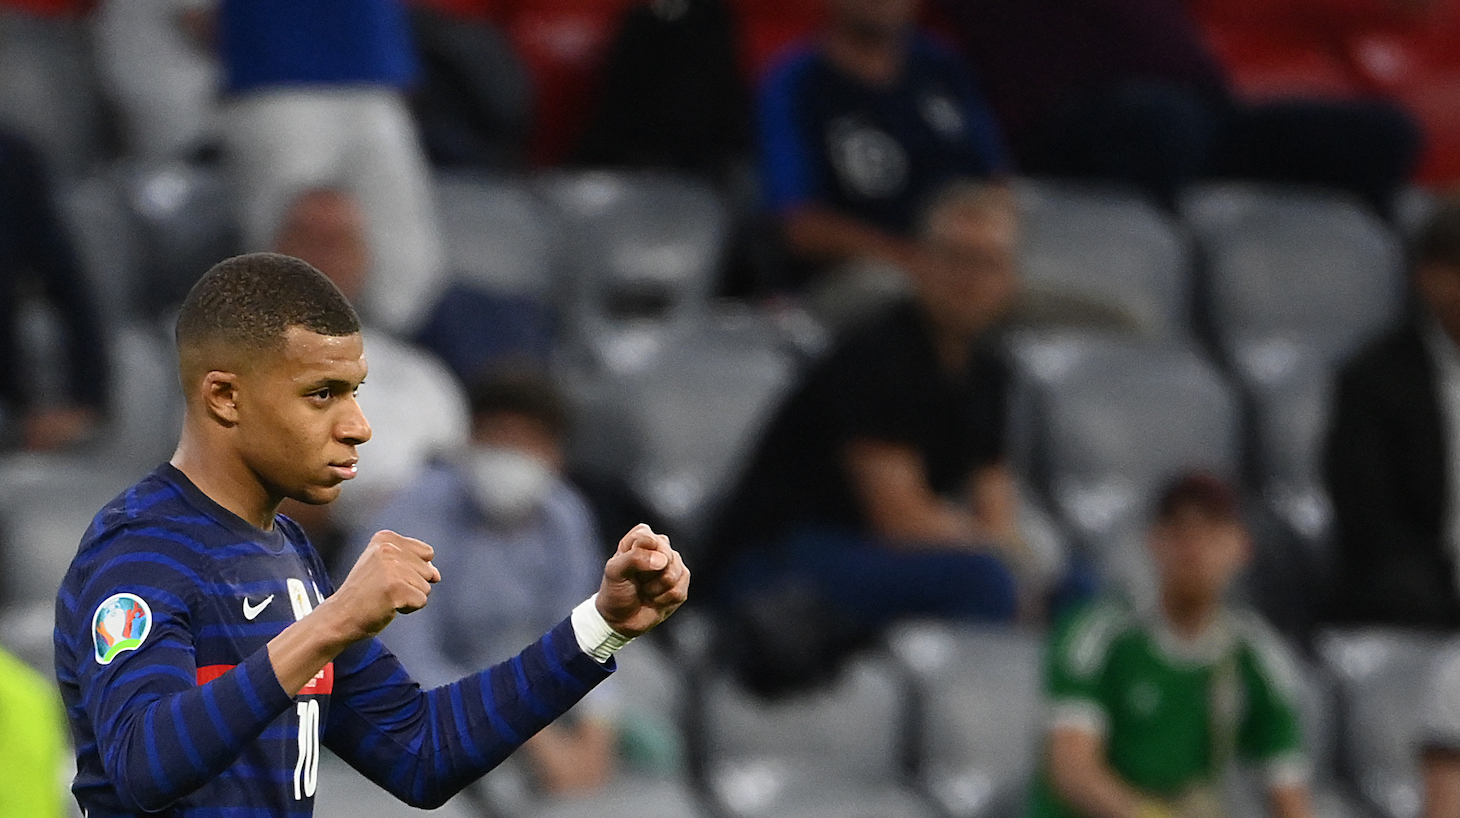 France's forward Kylian Mbappe celebrates after their win in the UEFA EURO 2020 Group F football match between France and Germany at the Allianz Arena in Munich on June 15, 2021.